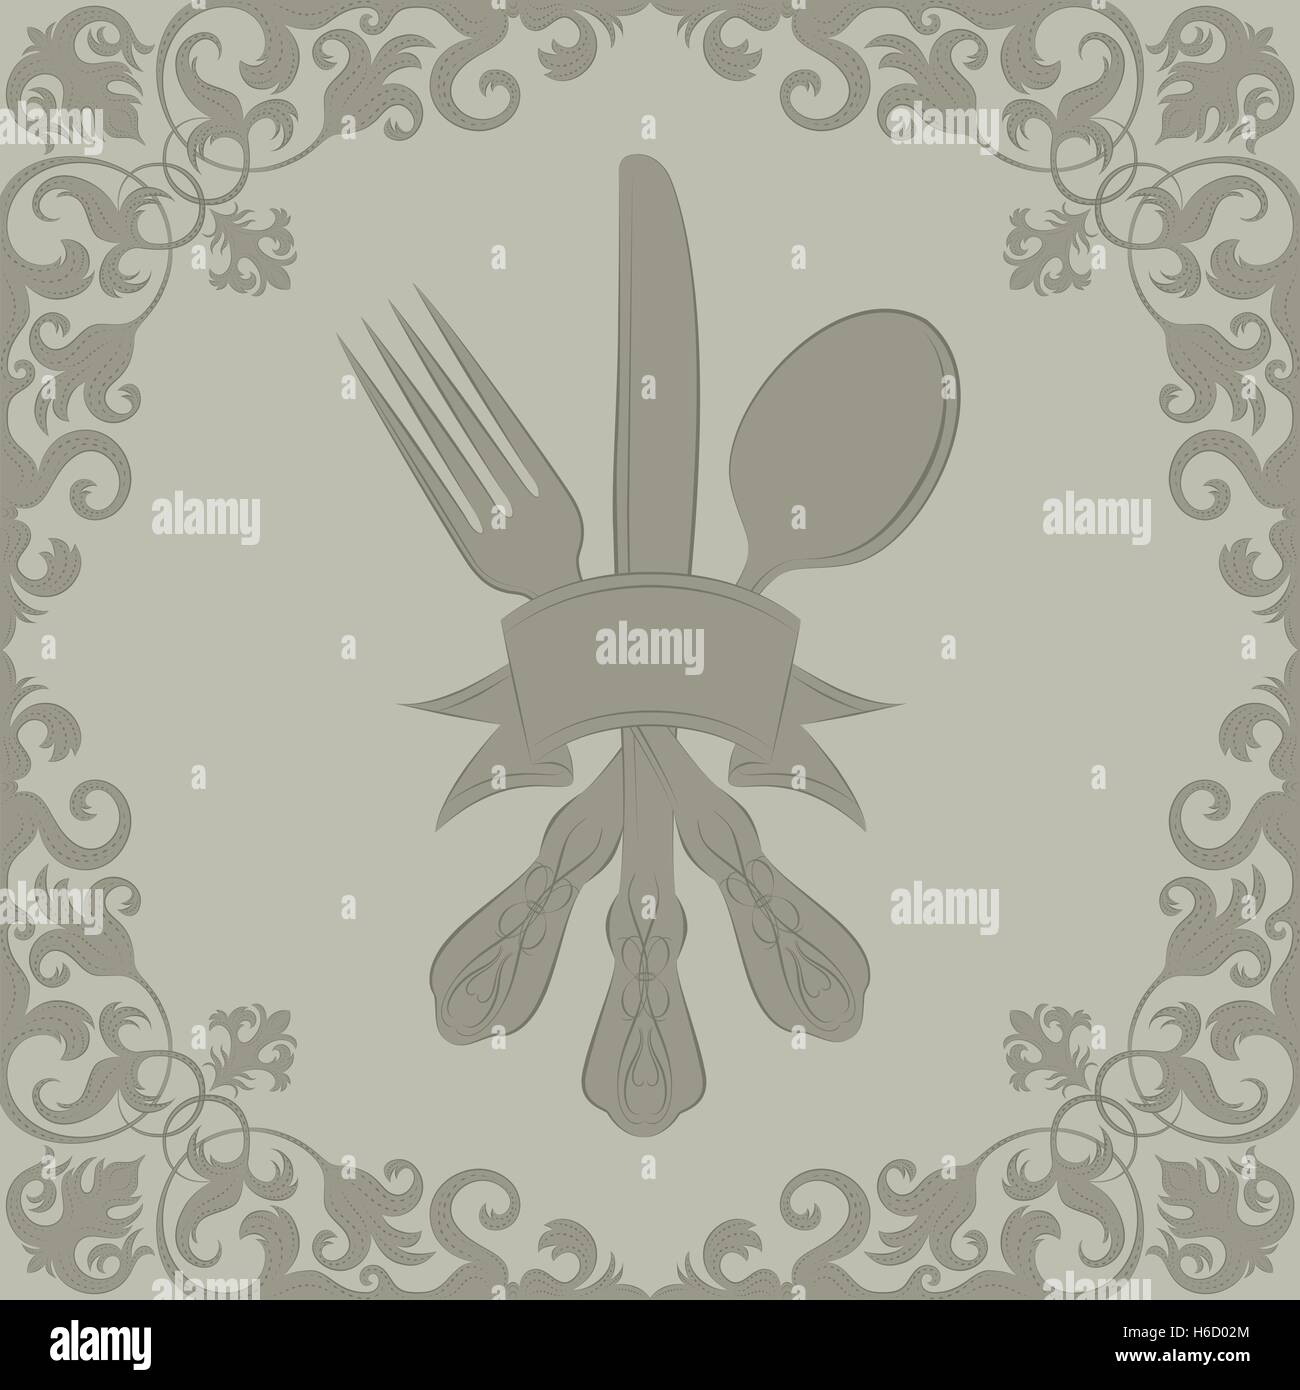 Silverware and scroll frame  Silverware behind a ribbon banner over a background with decorative scroll work. Stock Vector